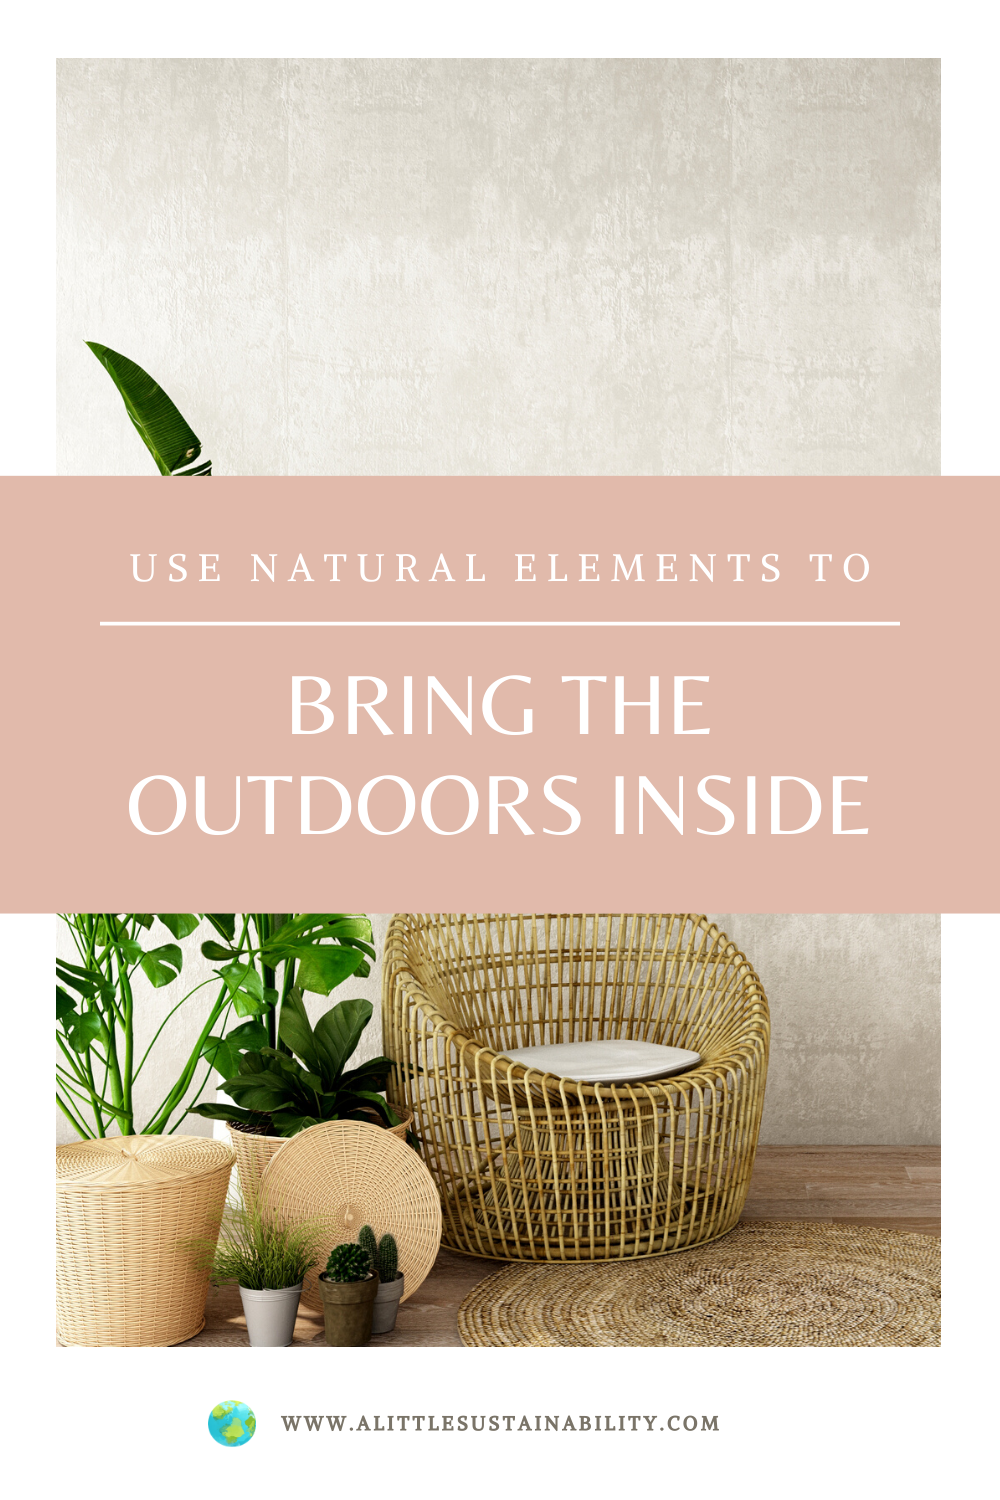 Use Natural Elements to Bring the Outdoors Inside. How to add decor to your interiors that will bring the outdoors inside. Paint colors, window fixtures, water elements, and lighting that inspires nature inside the home. #homedecor #homeinteriors #naturalhome #natural living